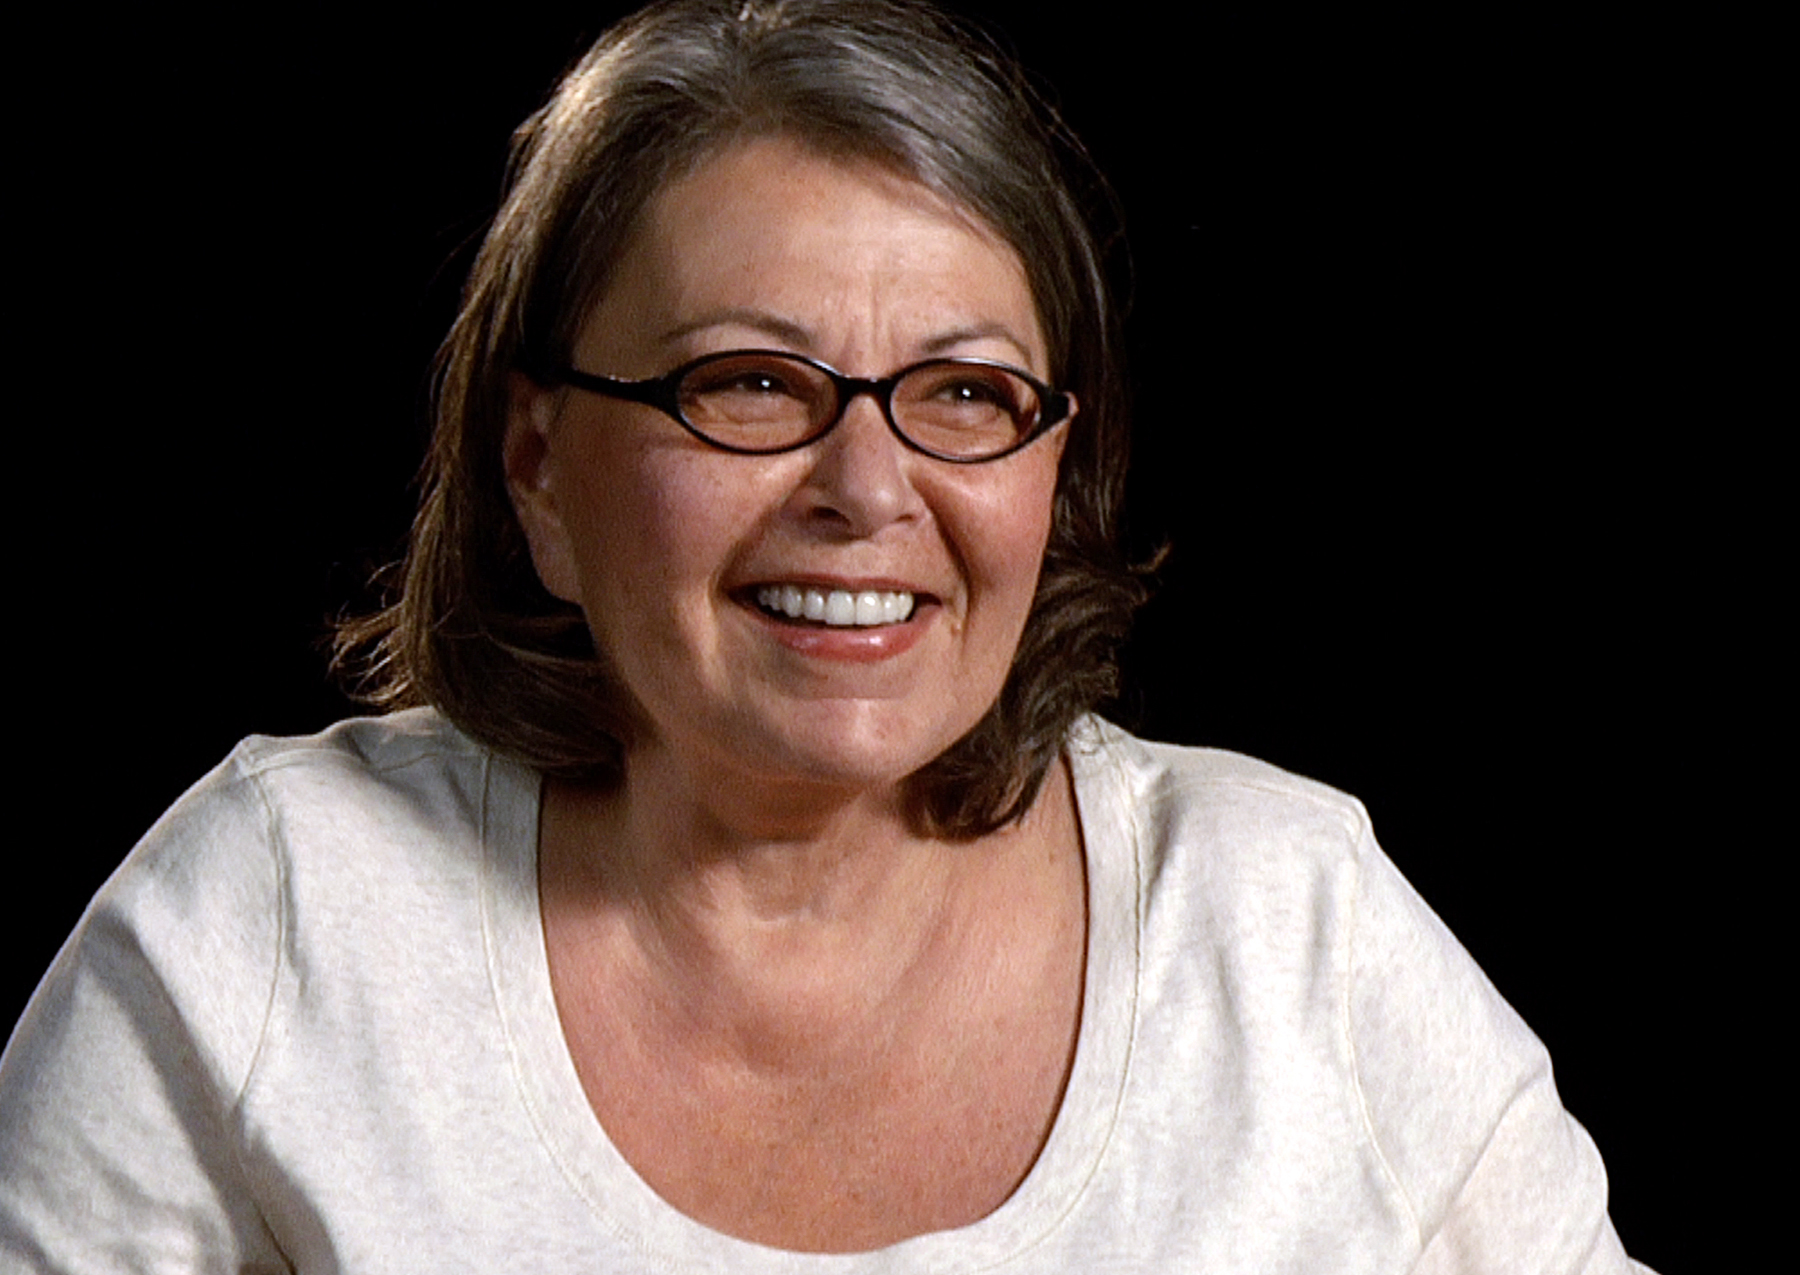 A close up photo of Roseanne Barr wearing glasses